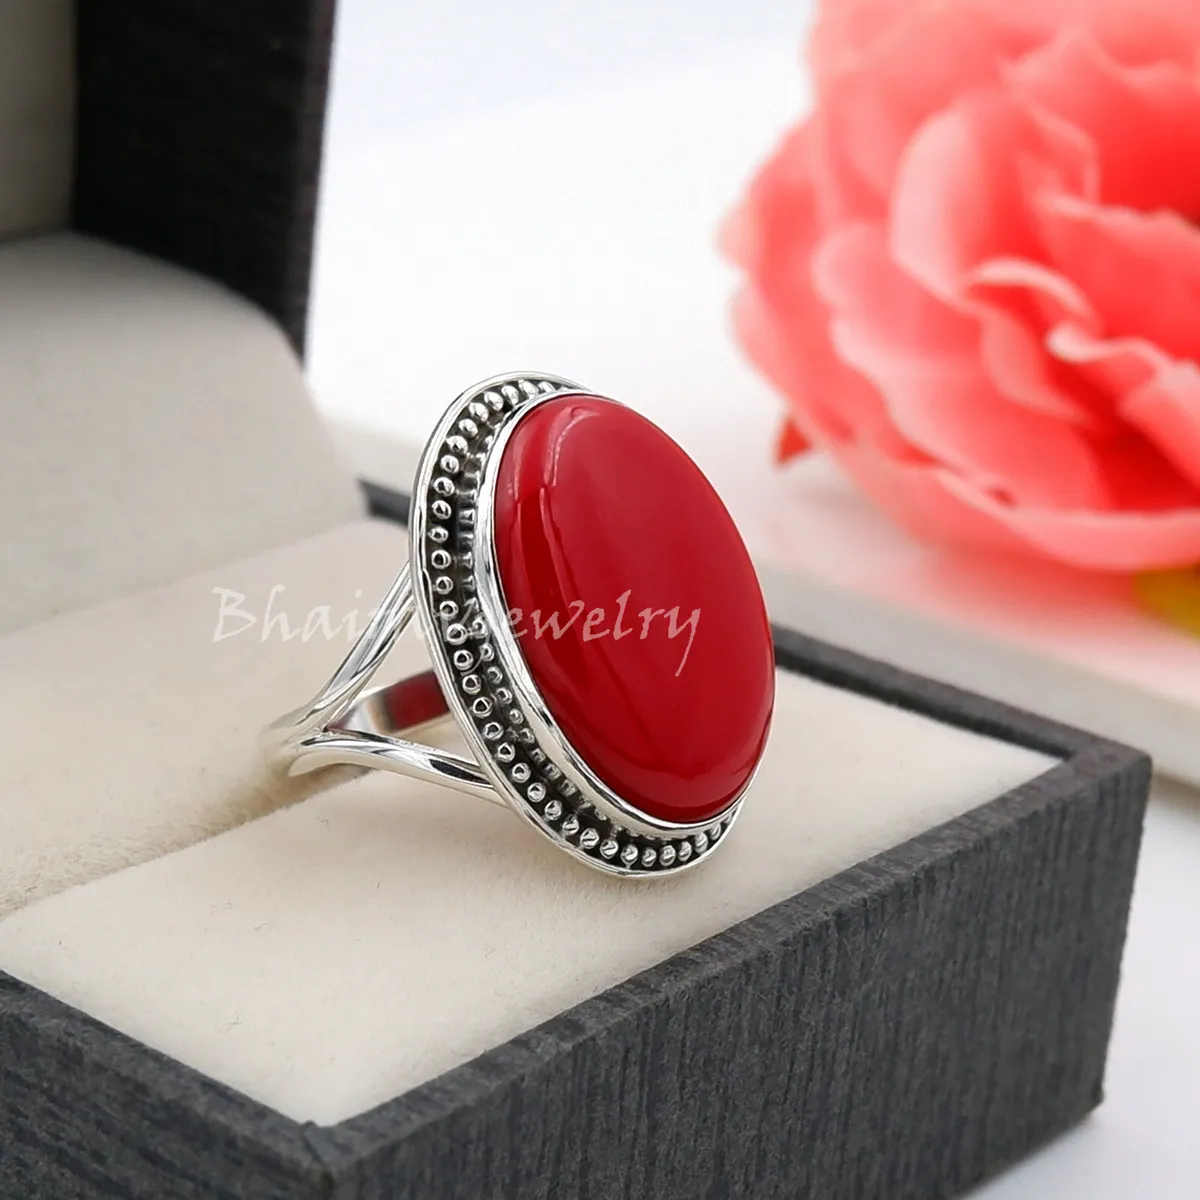 Kjjeaxcmy Fine Jewelry 925 Sterling Silver Inlaid Natural Red Coral Ring  Delicate New Female Gemstone Ring Trendy Support Test - Rings - AliExpress